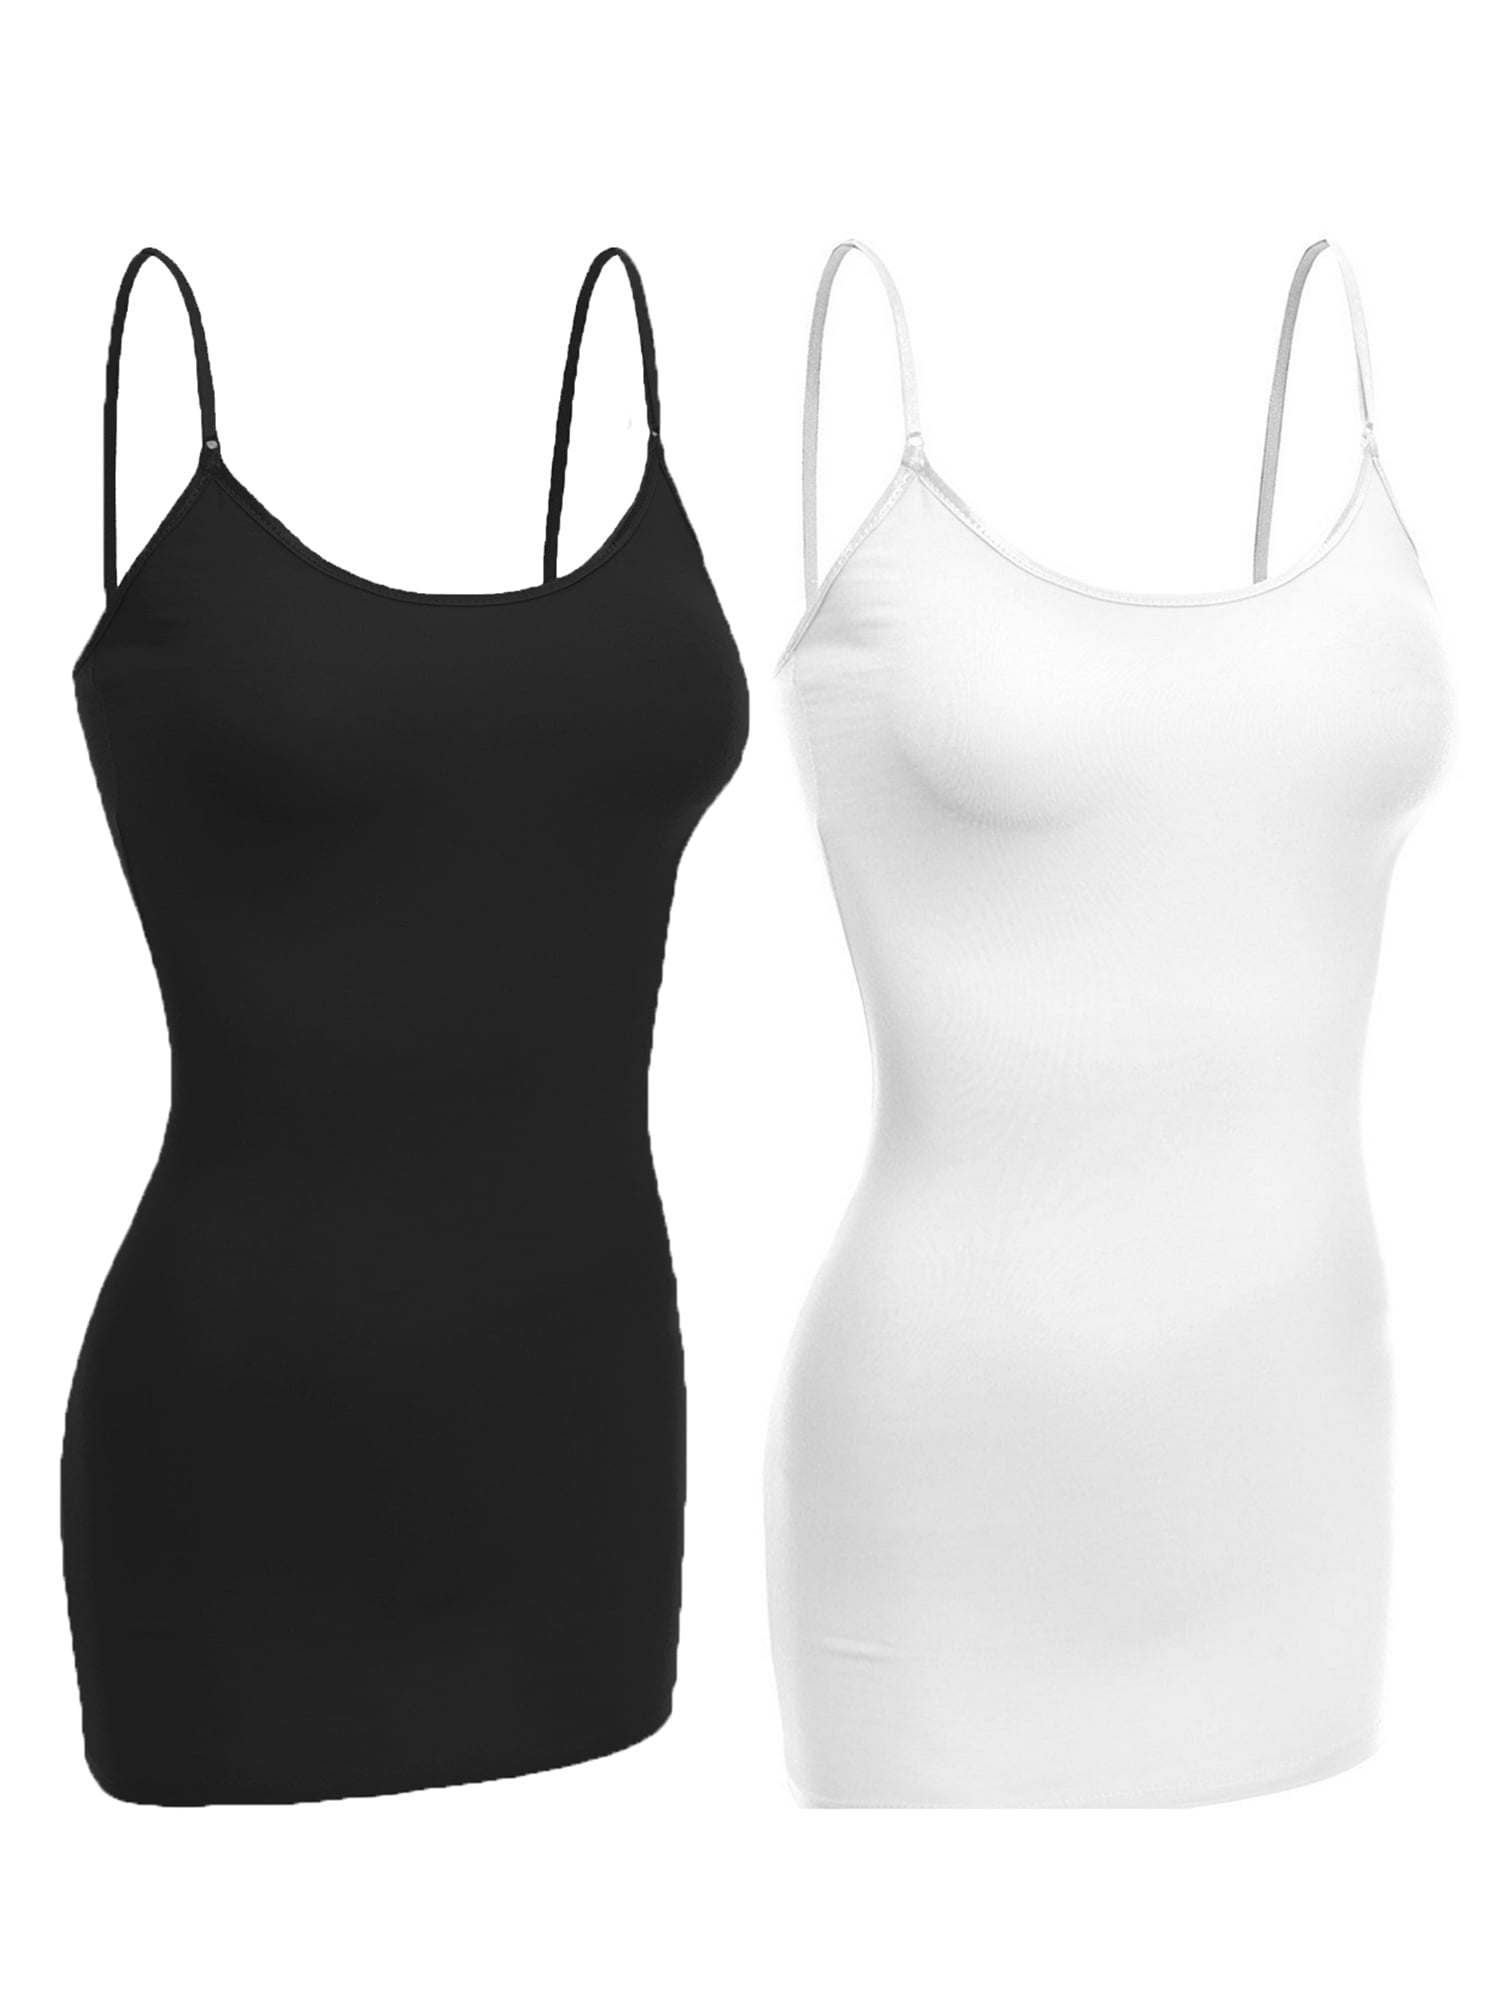 Basic Cami Tank Tops with Built-in Shelf Bra Women Lightweight Sports Home  Camisole Stretch Tank Top 